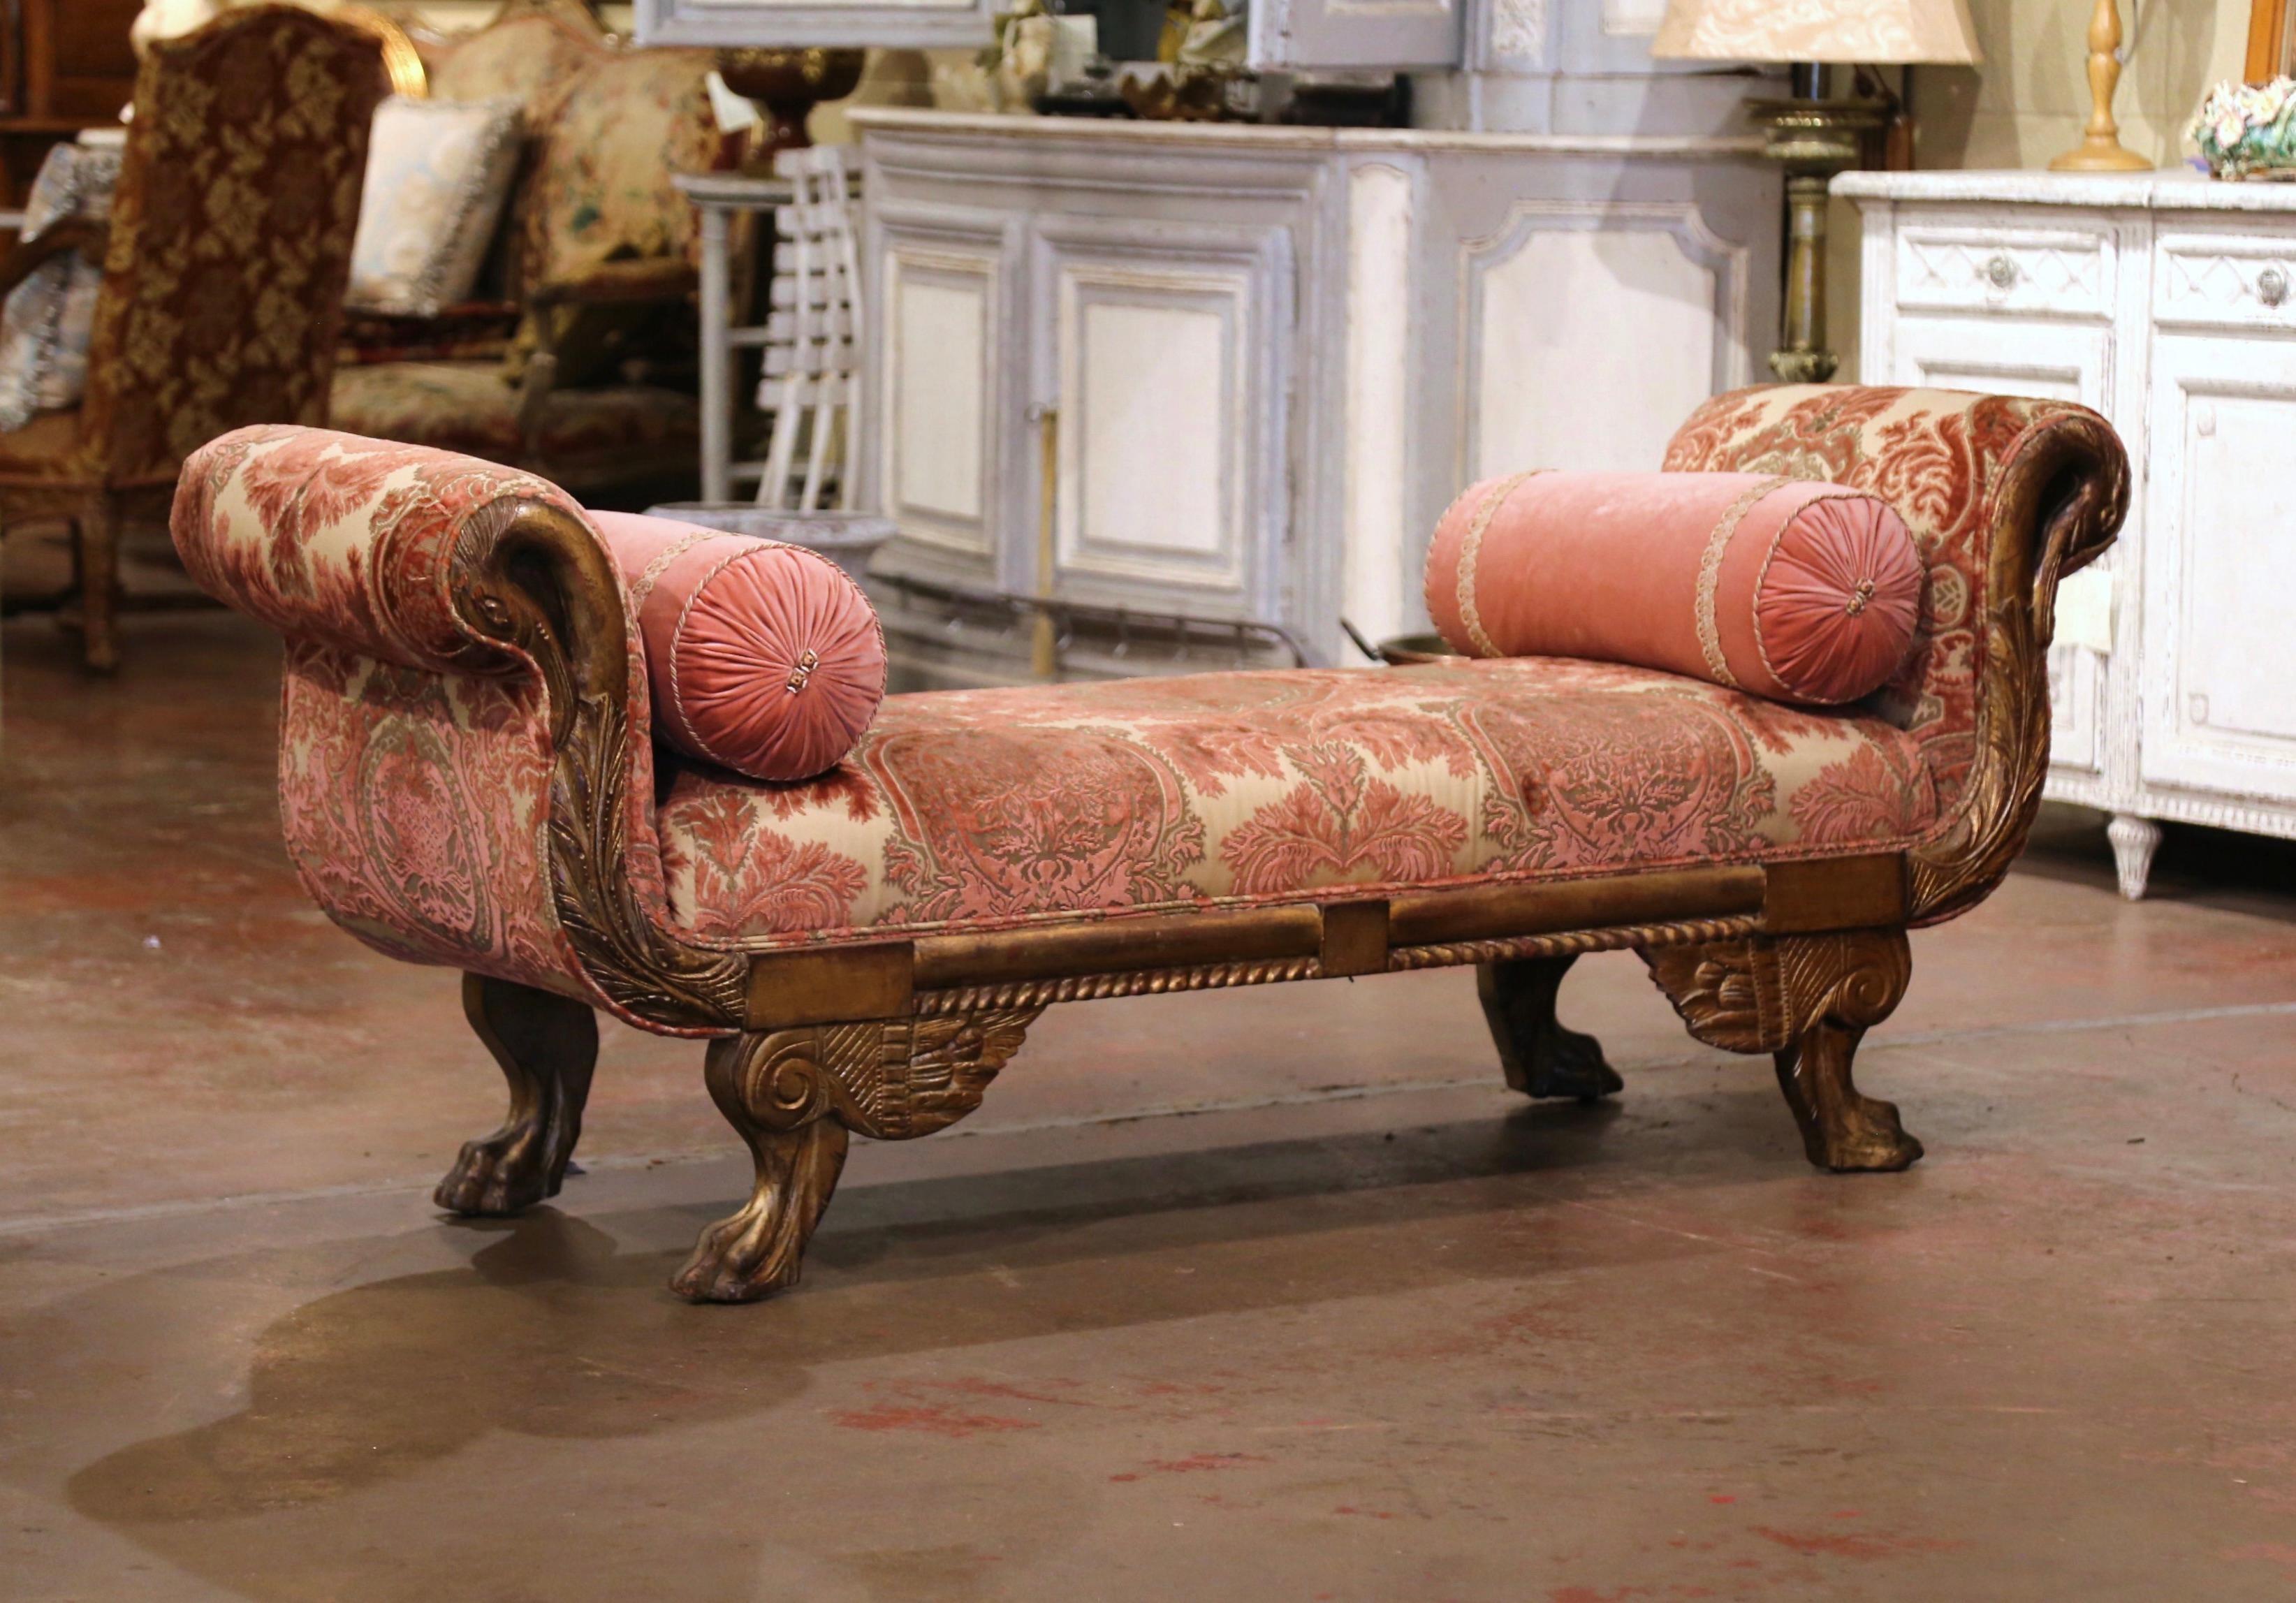 Place this elegant antique bench at the foot of a king size bed or in your living room for extra seating. Crafted in Italy, circa 1860, the traditional banquette stands on scrolled legs with wing decor at the shoulder, and ending with claw feet.